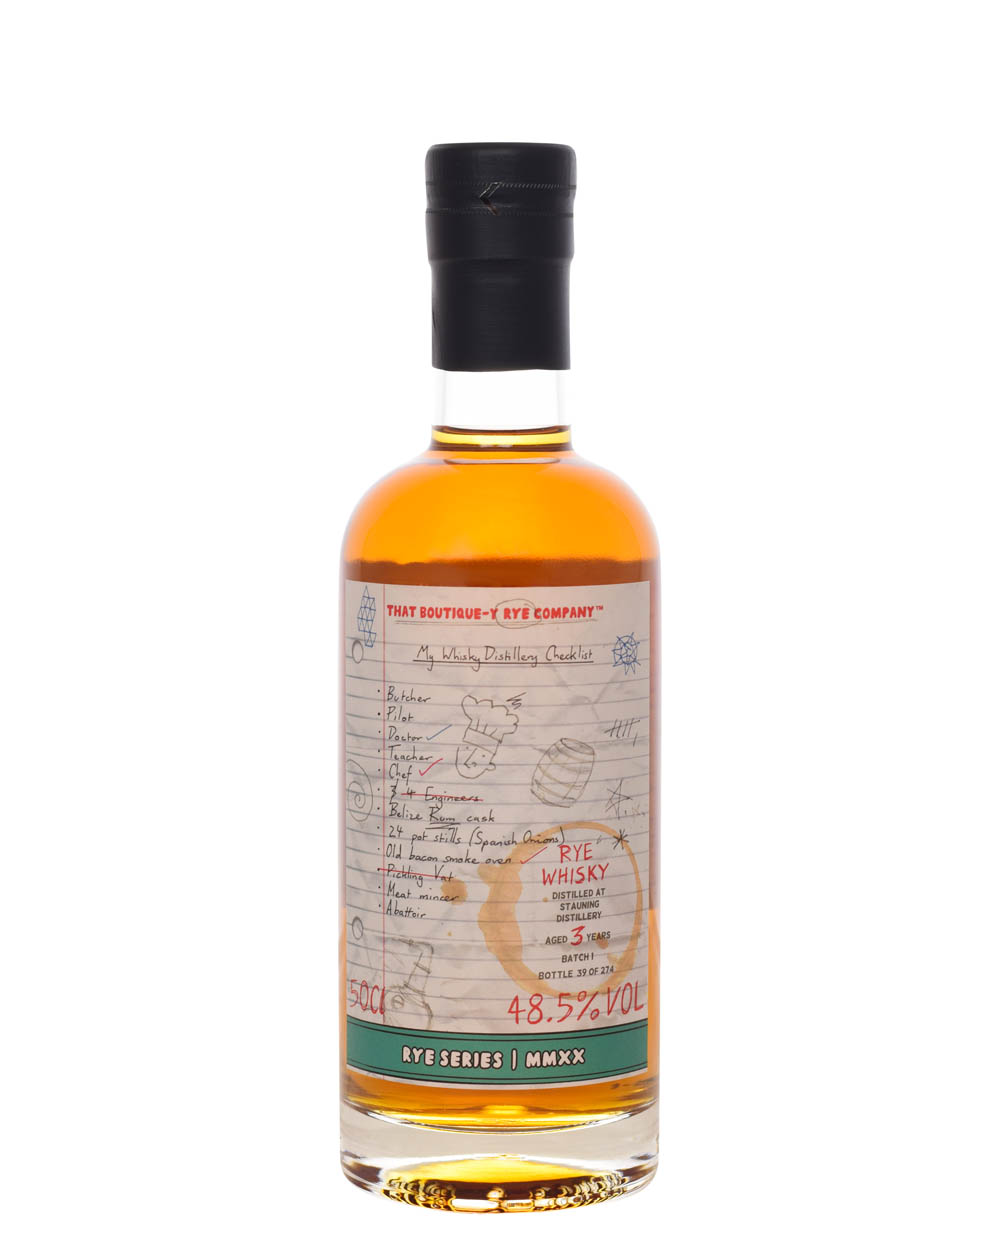 Stauning 3 Years Old That Boutique-y Rye Company Rye Batch 1 Musthave Malts MHM